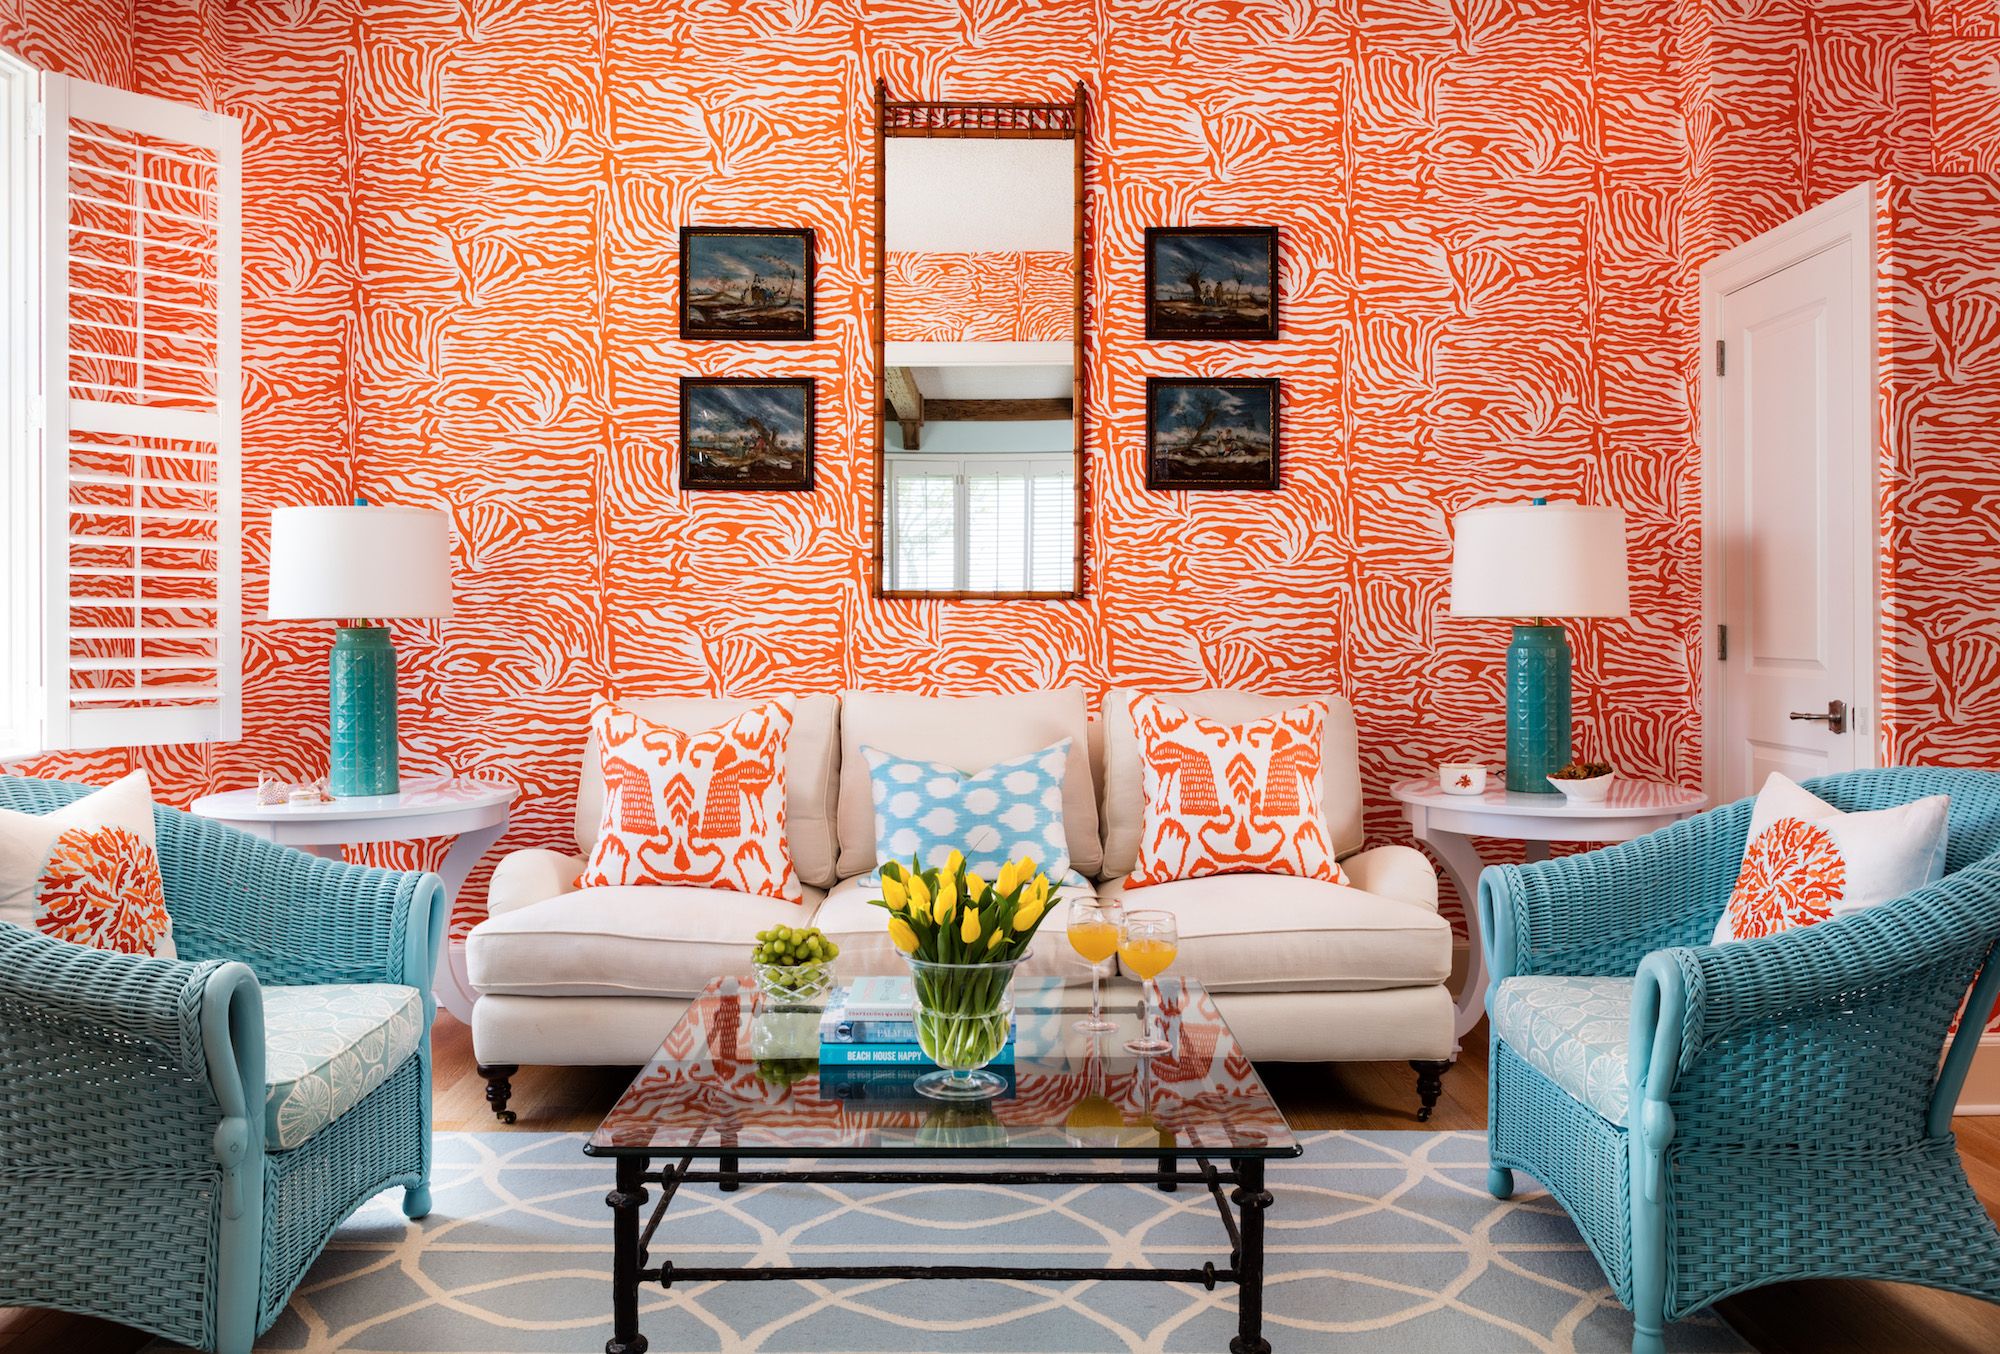 Living room wallpaper tips and ideas to use on your walls